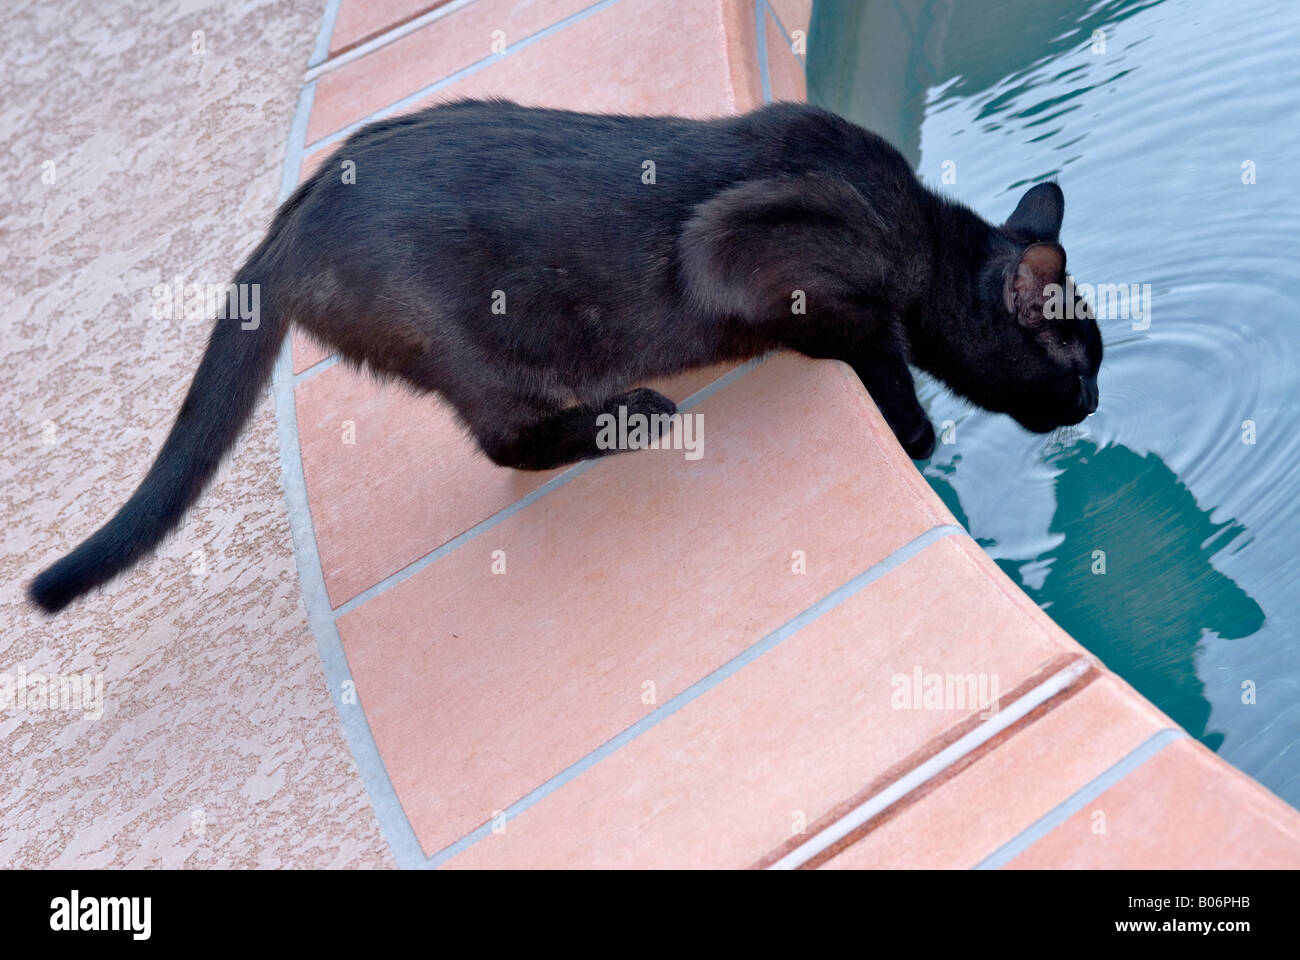 A black feline leans over to take a drink from a non-chlorinated pool of blue water Stock Photo